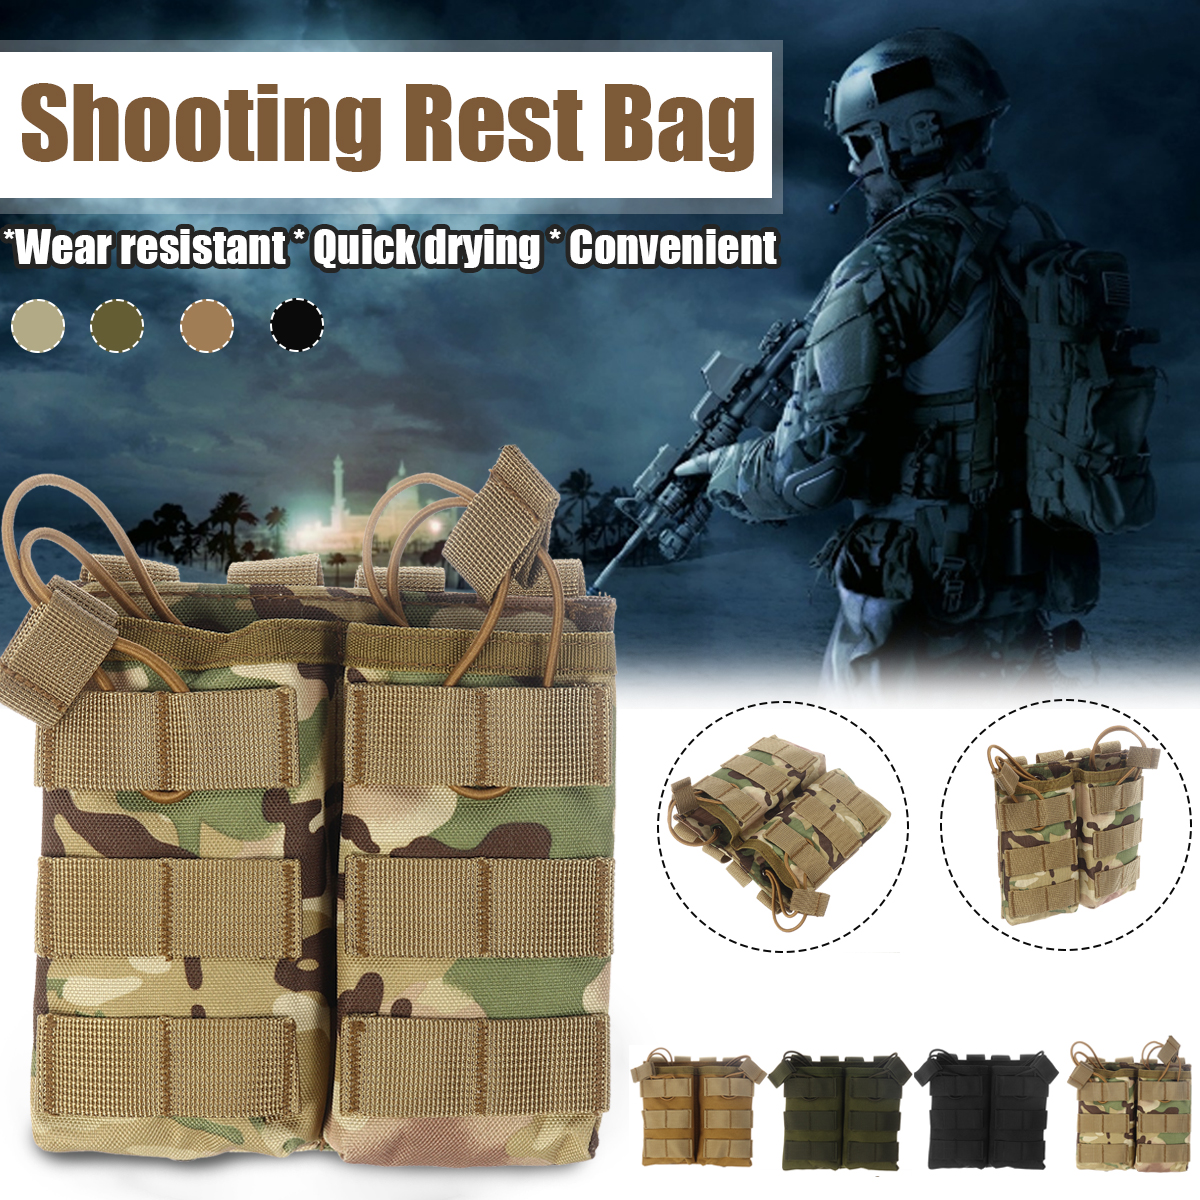 Tactical-M4-Magazine-Pouch-600D-Oxford-Double-MOLLEPALS-Fast-Mag-Pouches-For-Outdoor-Hiking-Hunting--1779790-2